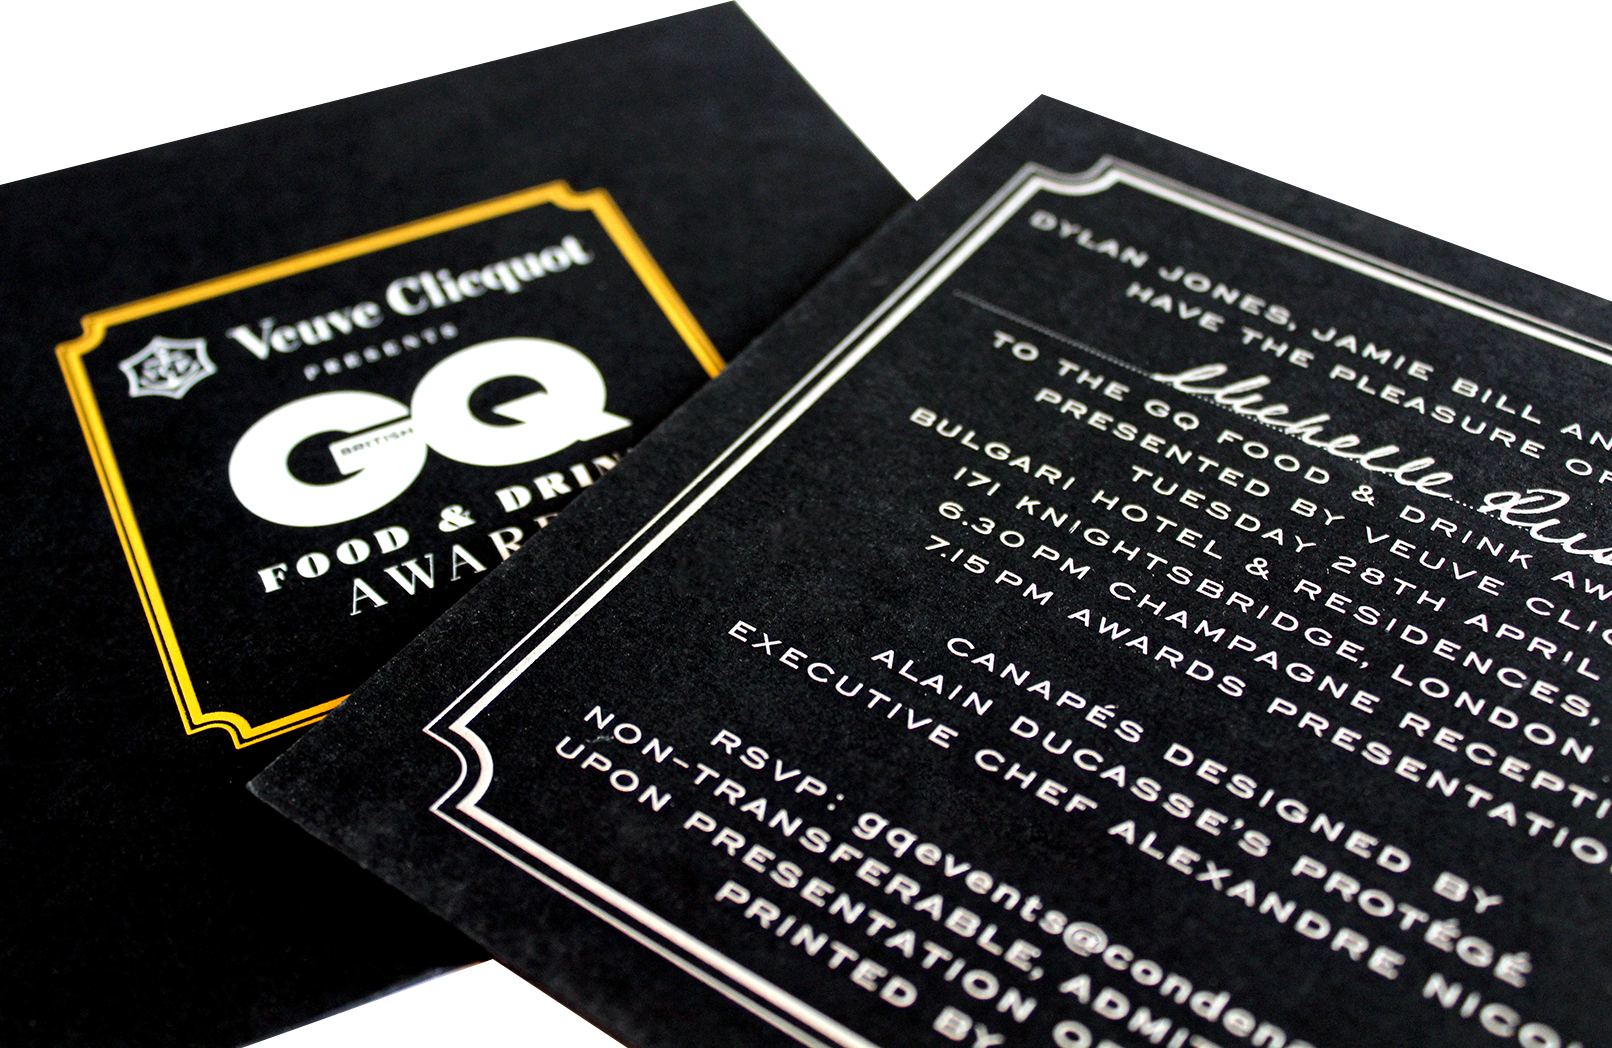 upmarket printed invitations on black card, with gold foil and white embossing